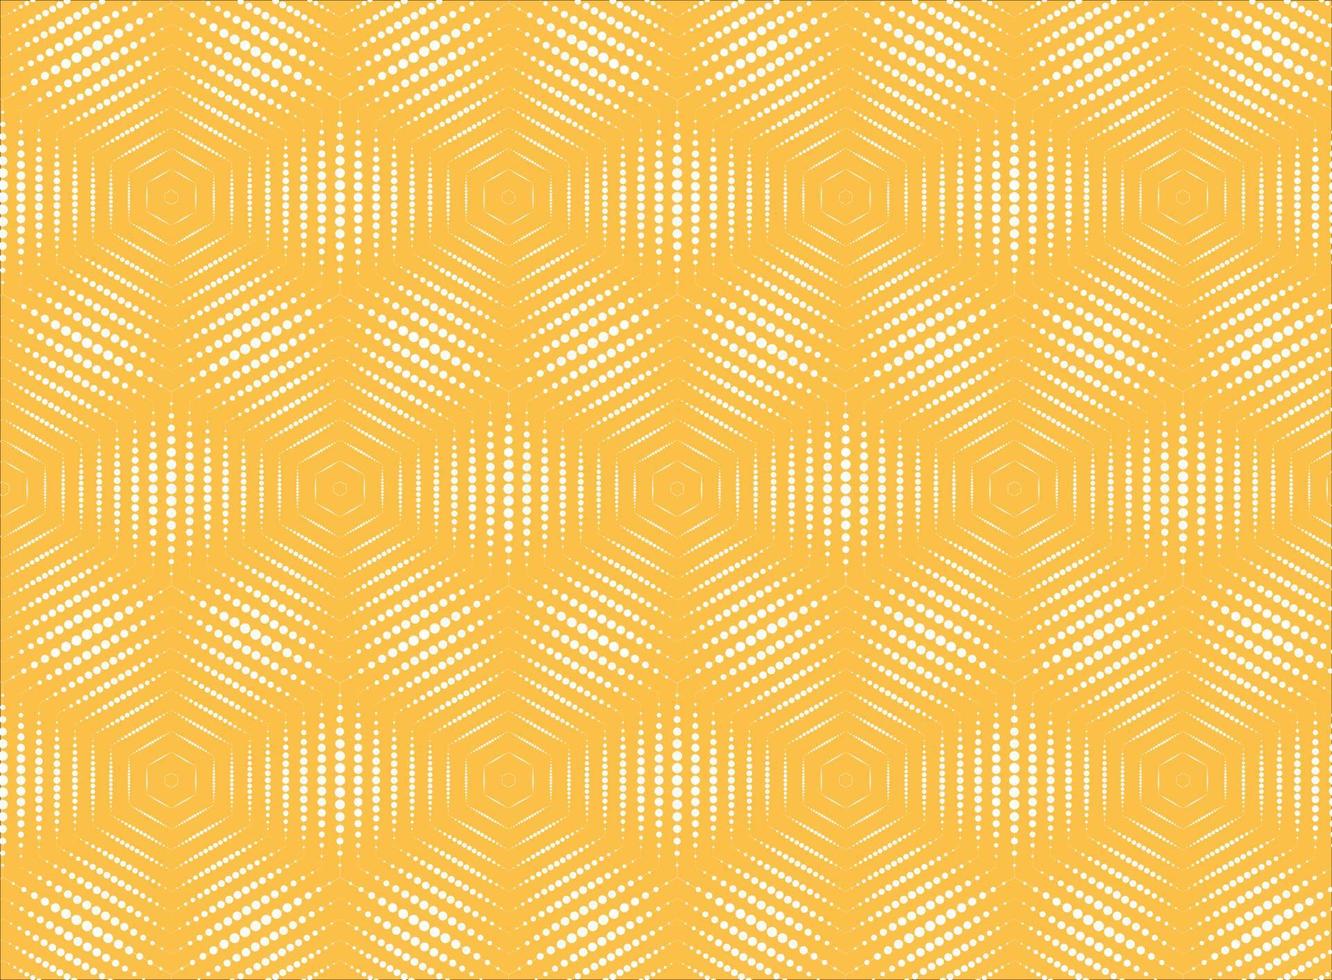 Abstract dotted geometric pattern. Floral background. Vector illustration